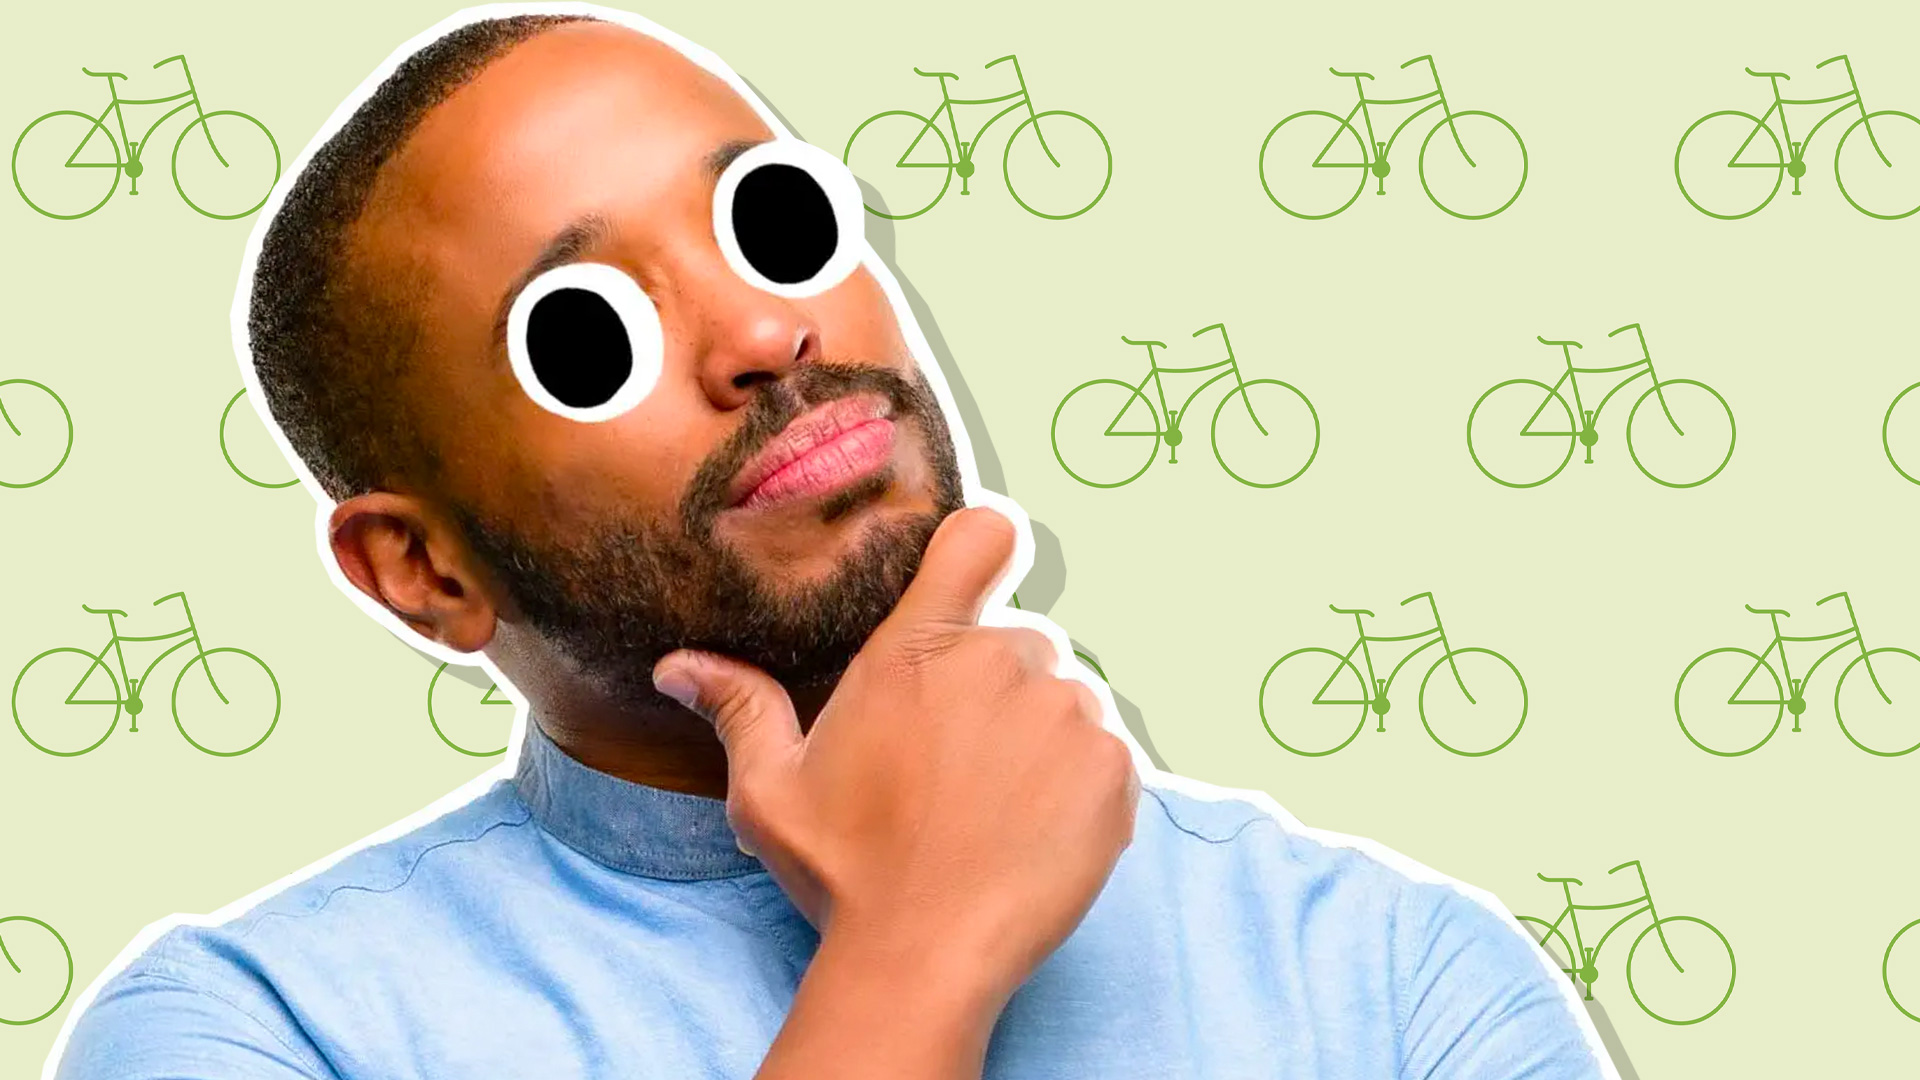 A man thinking about bikes